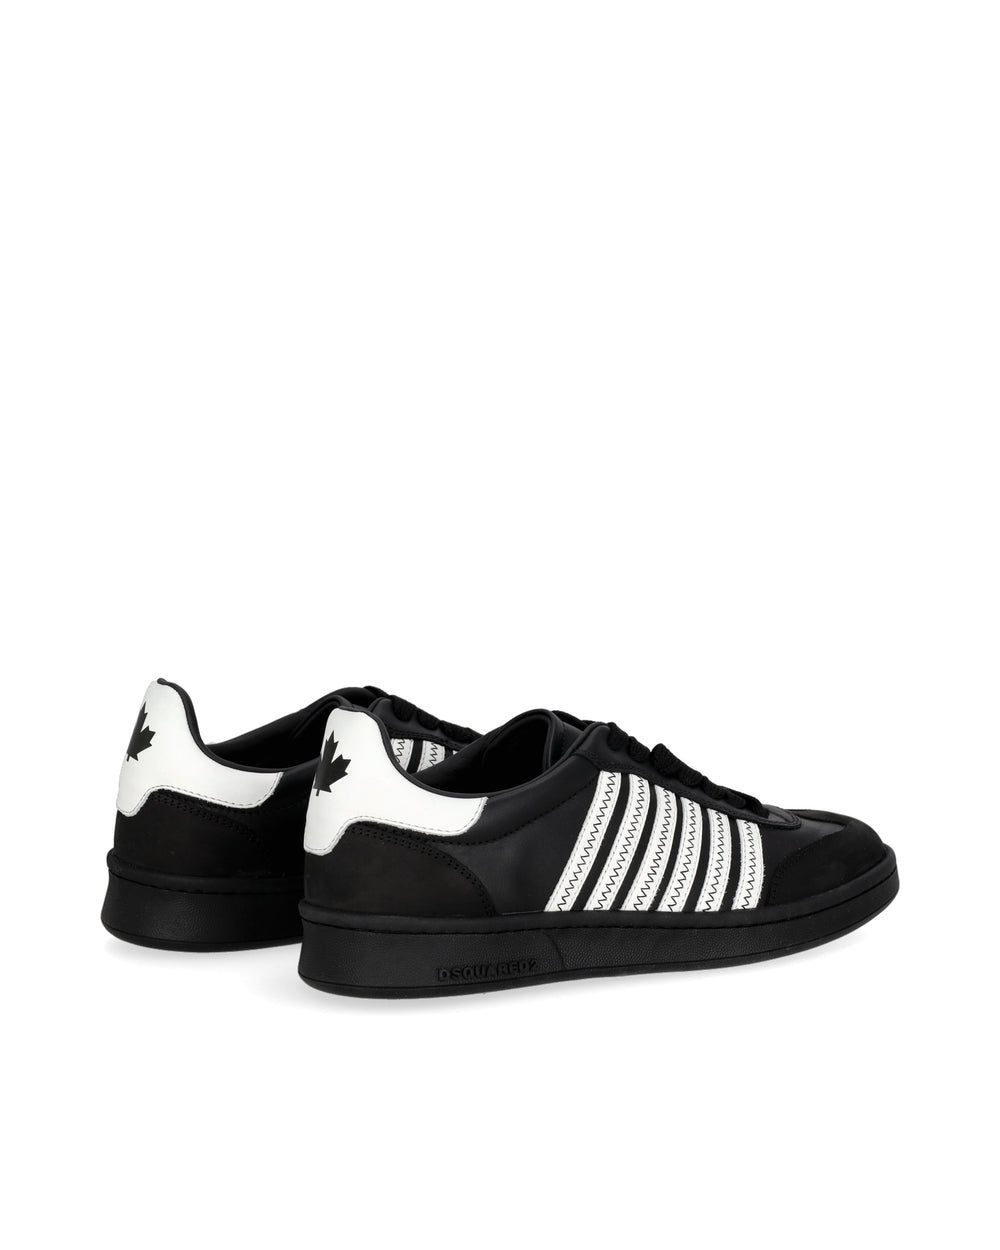 DSQUARED2 | SNEAKERS | SNM018111100001